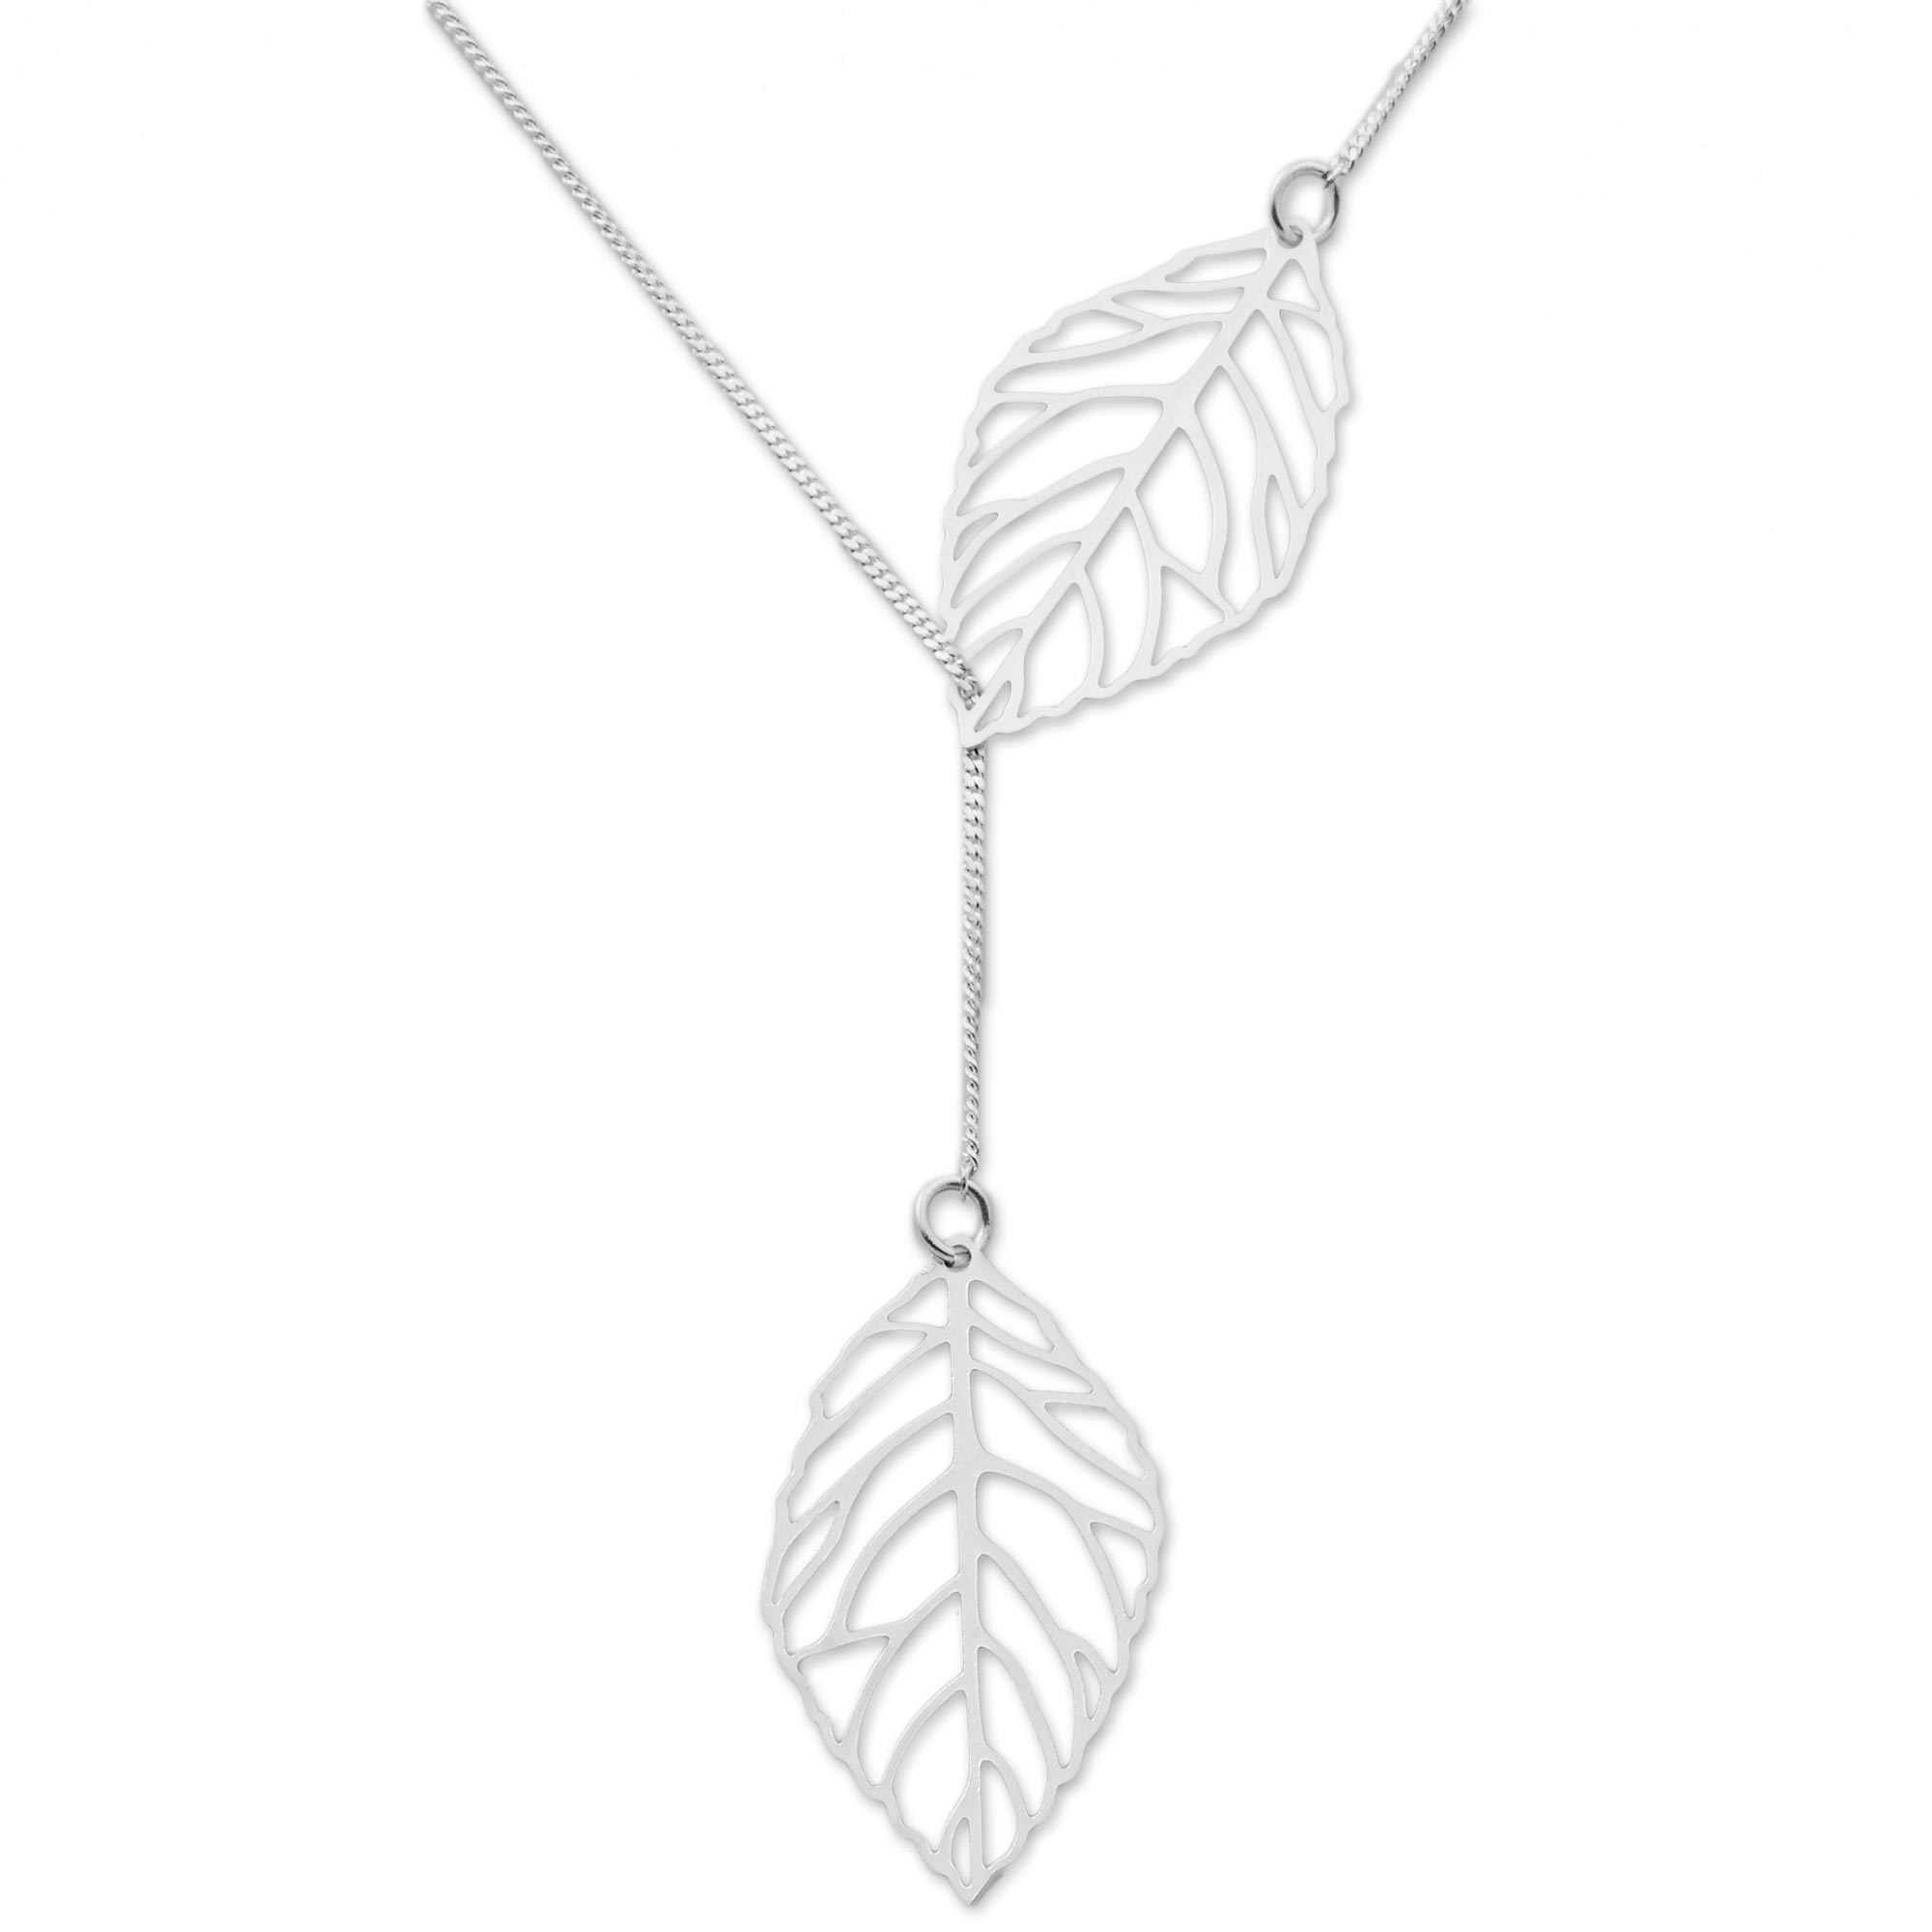 Sterling Silver Pendant Necklace Leaves from Peru - Shining Leaves | NOVICA